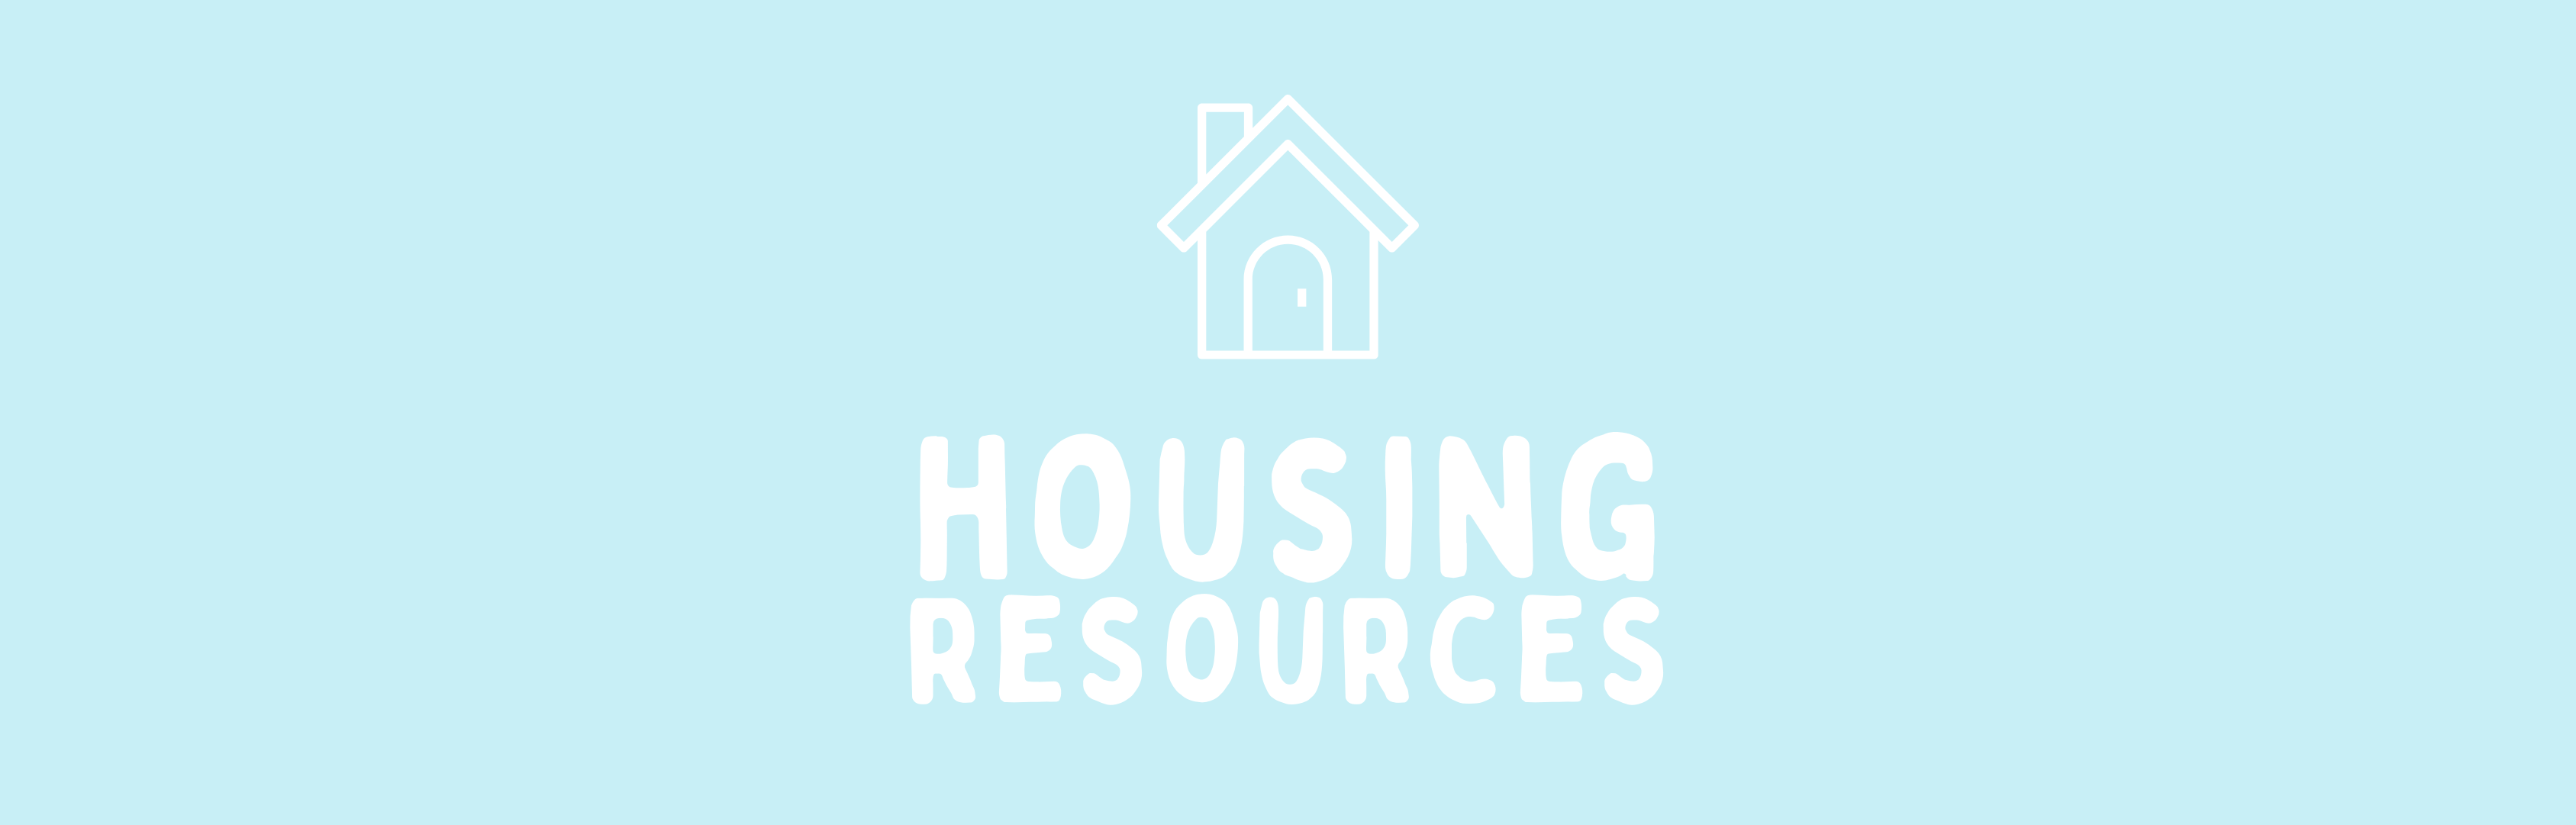 Graphic of Housing Resources